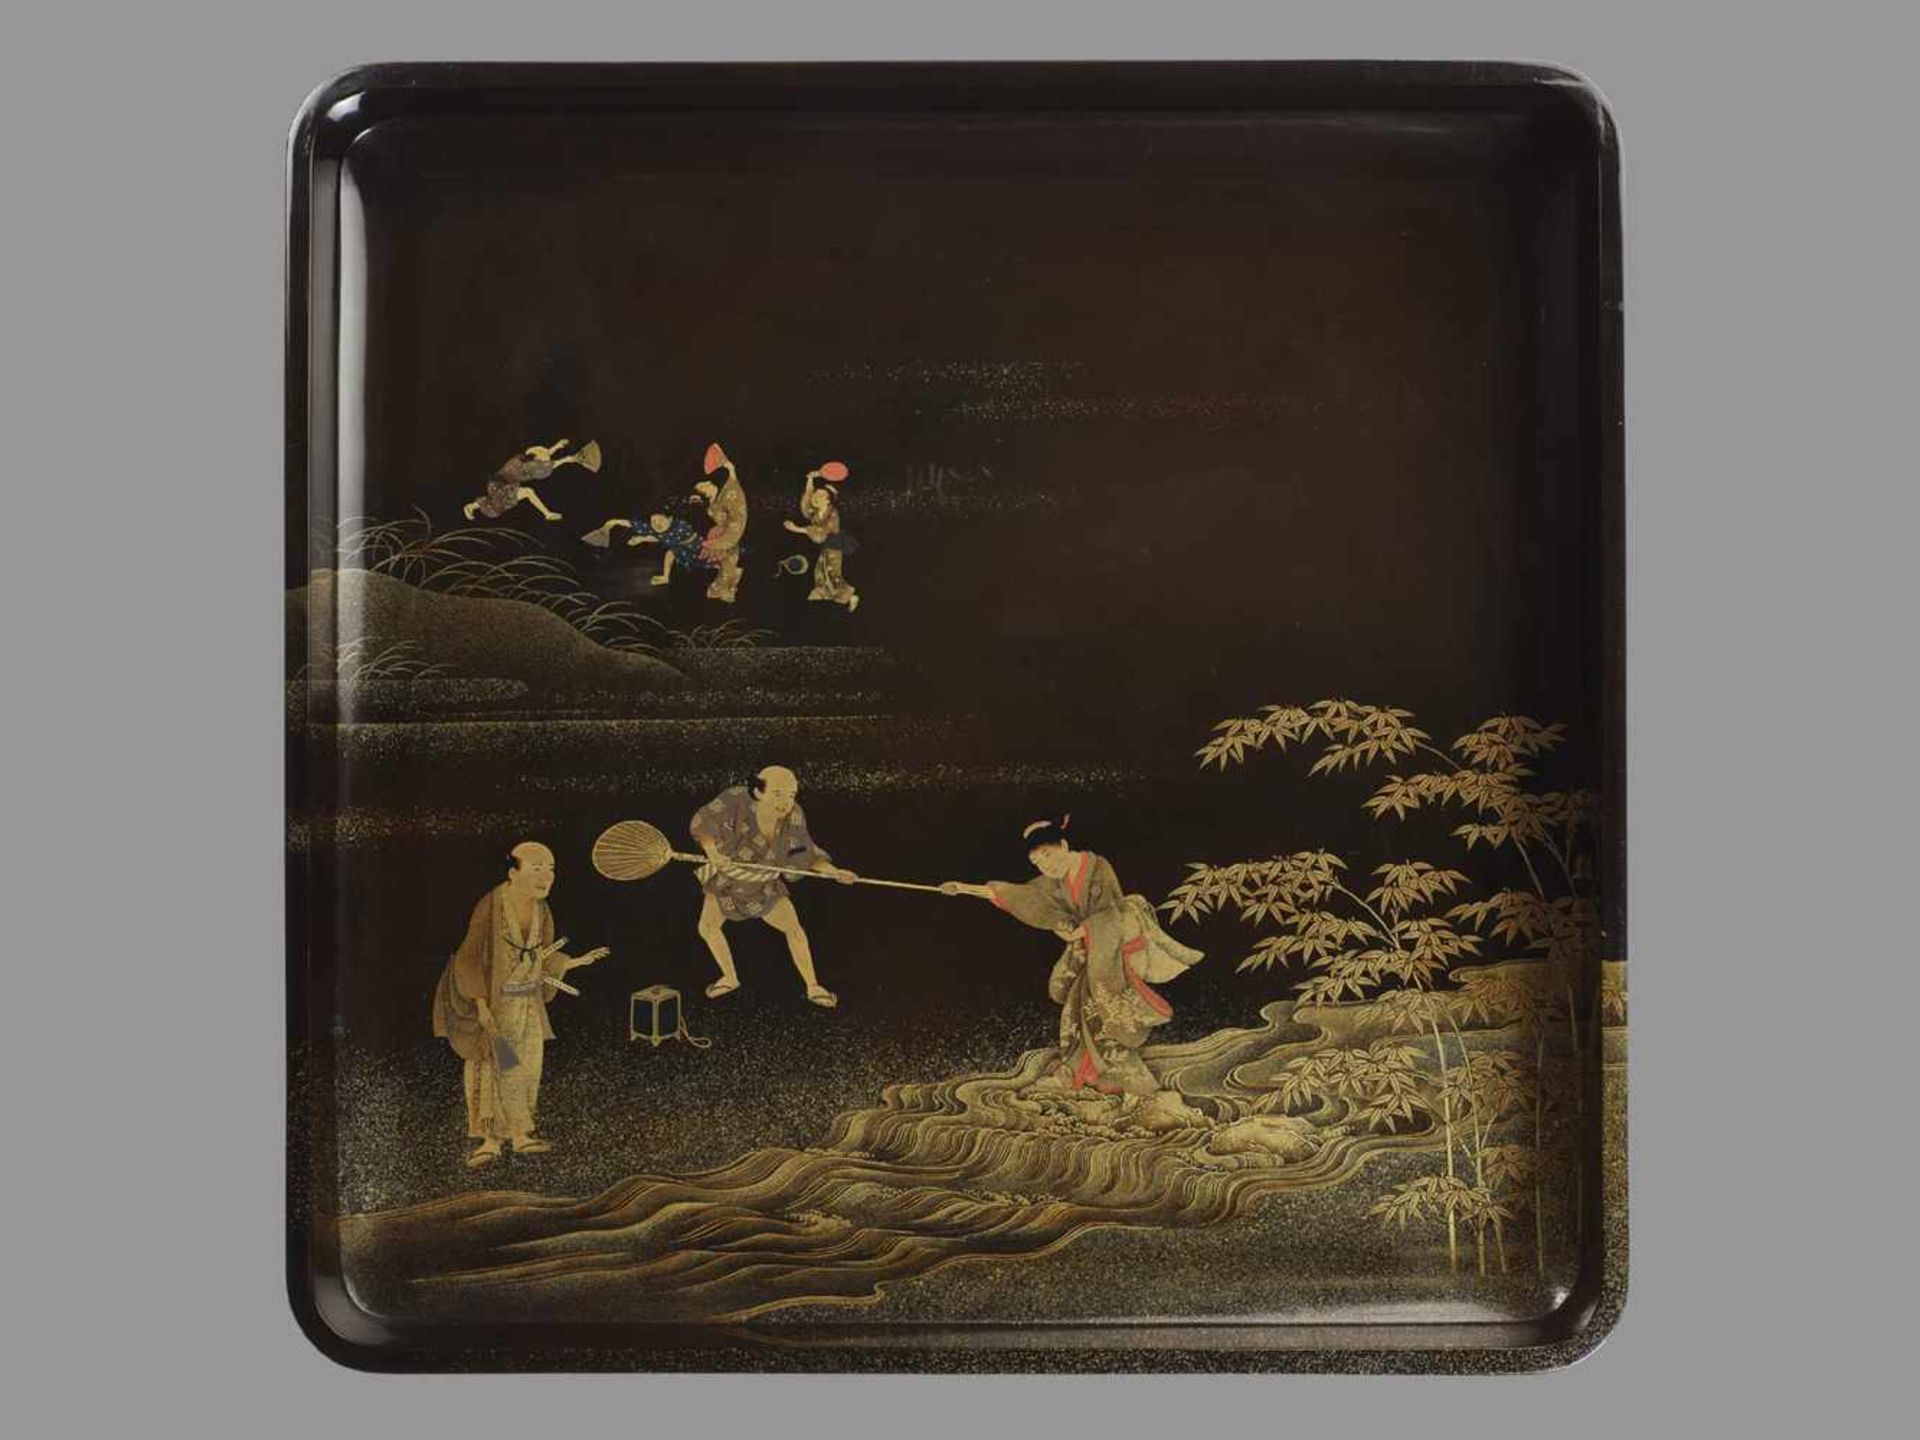 A GOLD LACQUER TRAY Japan, late 19th century, Meiji period (1868-1912)Finely painted with a scene